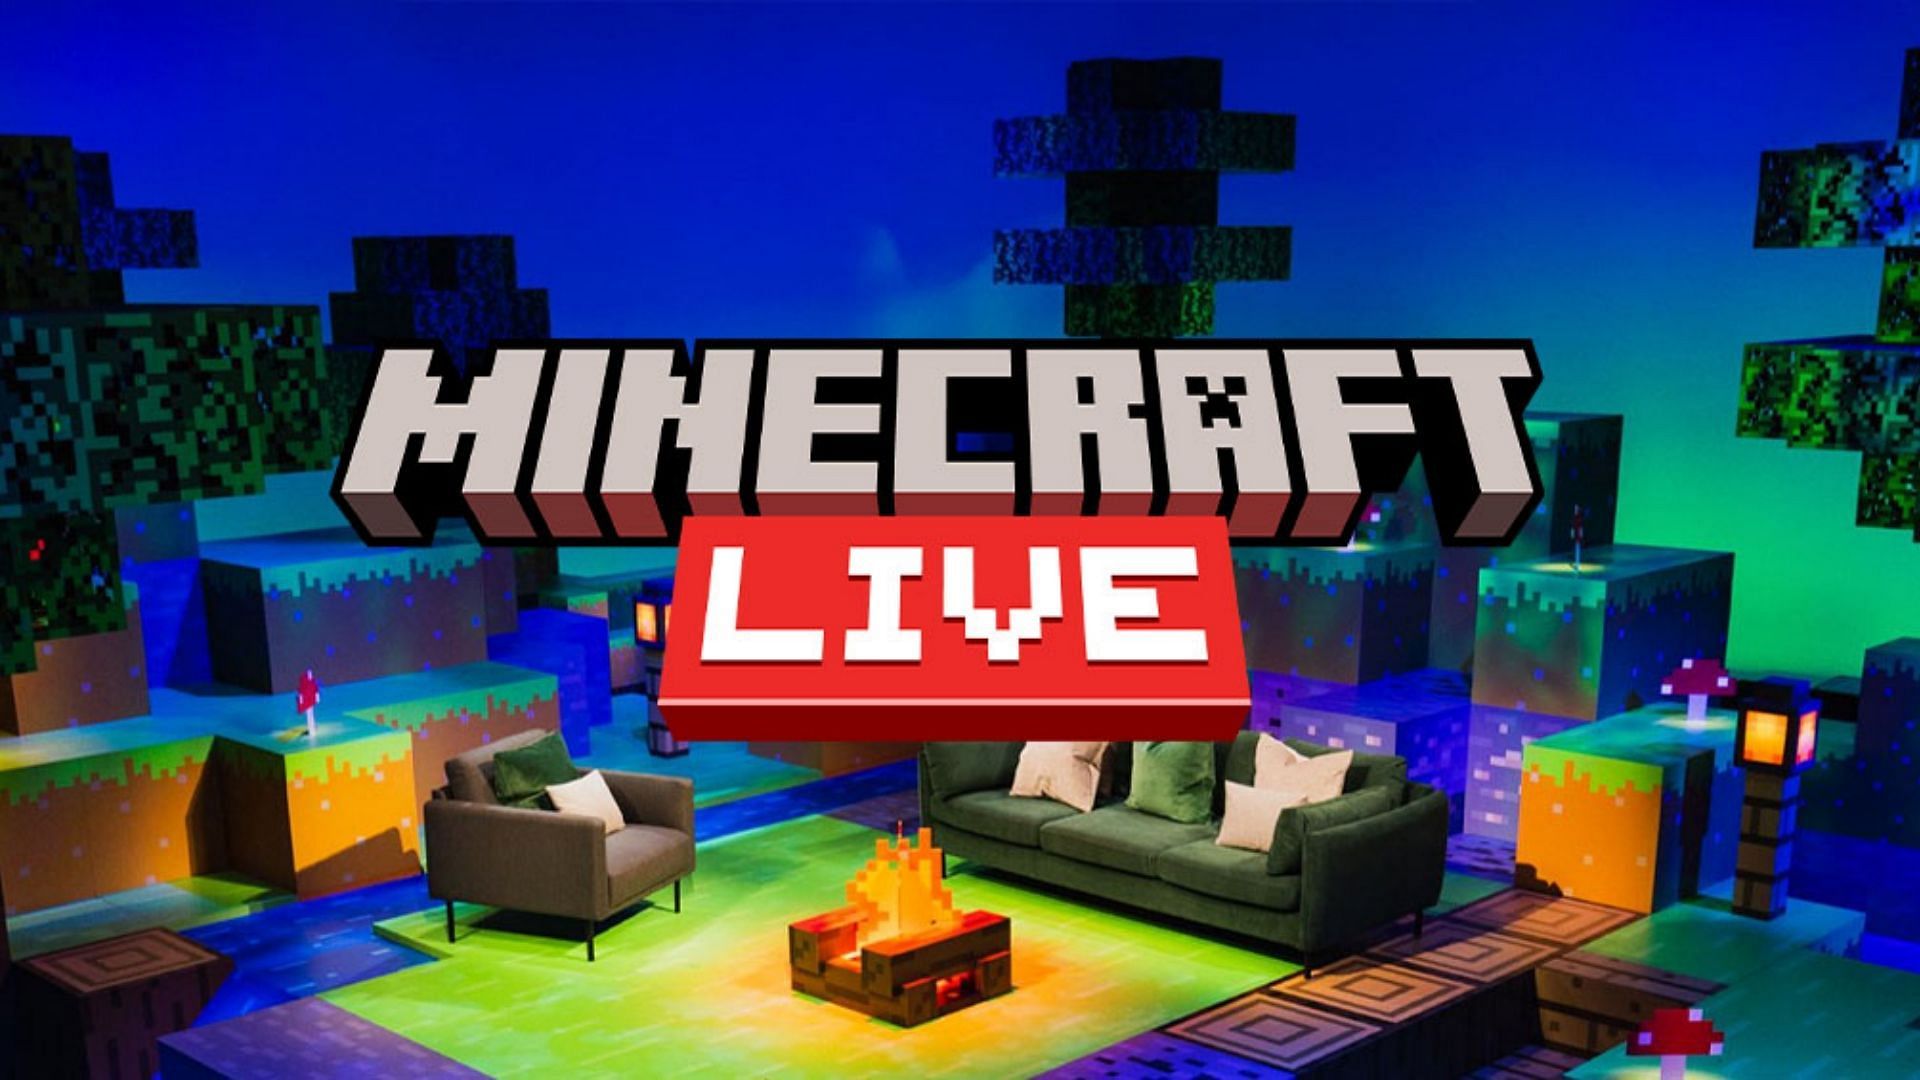 The mob vote winner will be announced at Minecraft Live event (Image via Mojang)